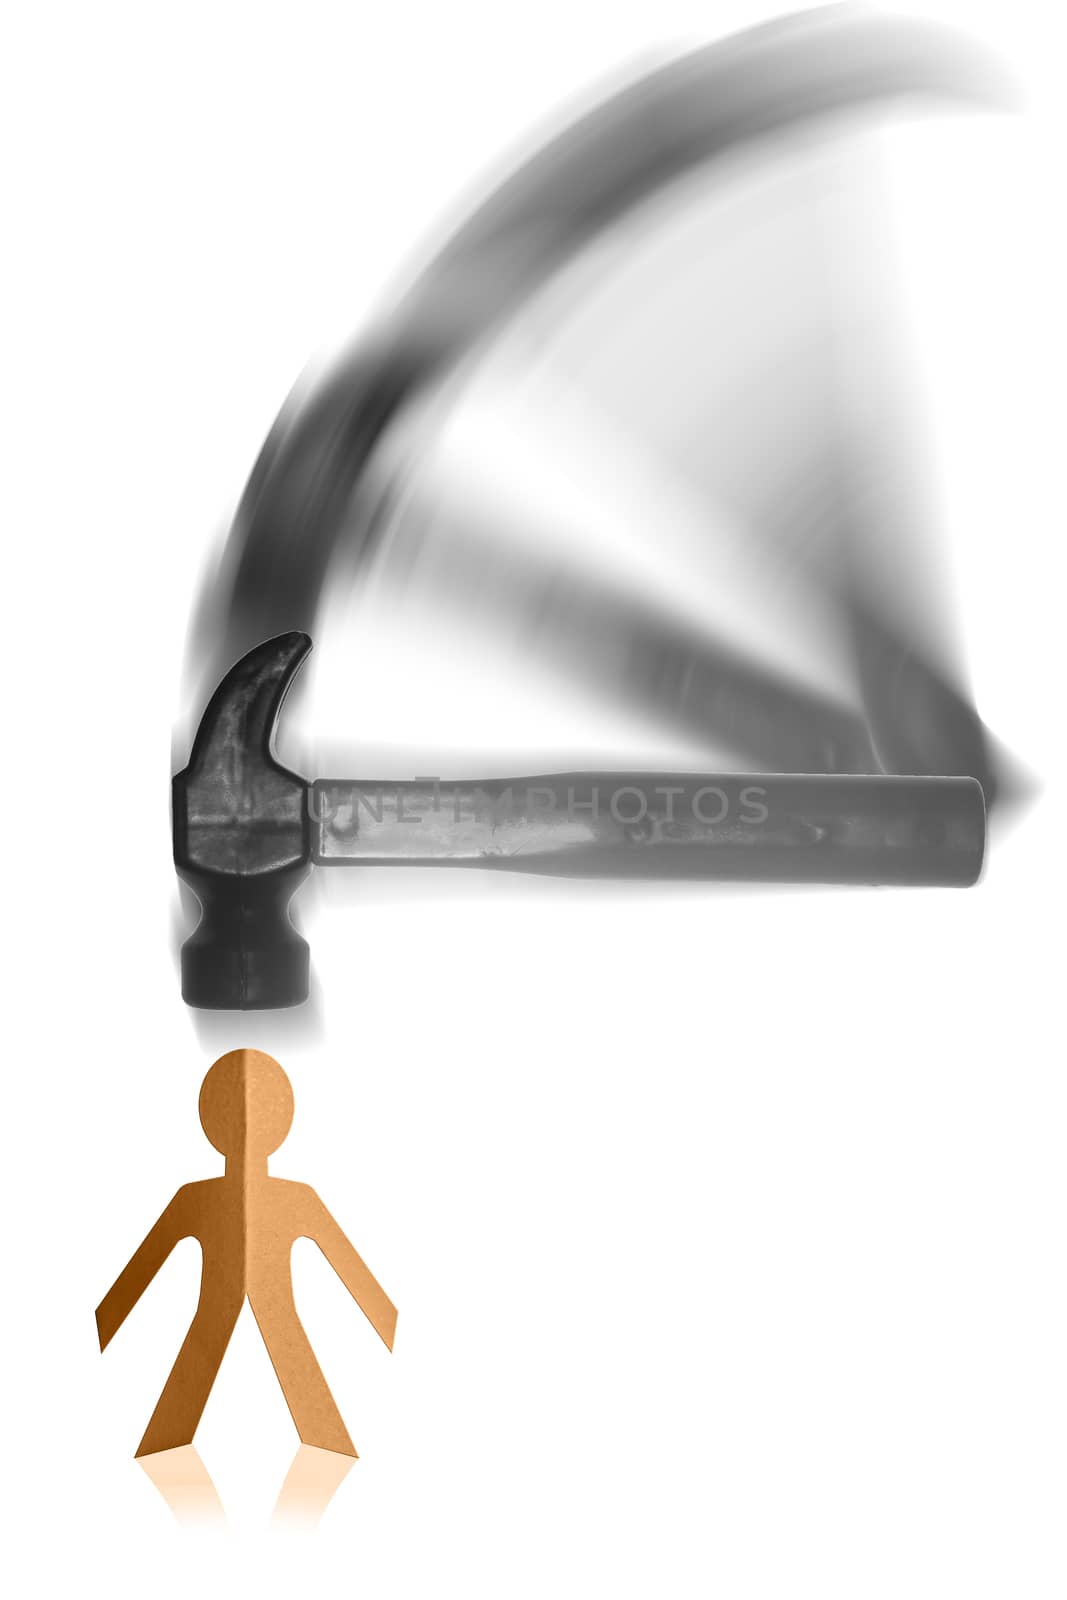 hammer hitting a Paper Man, with motion blur